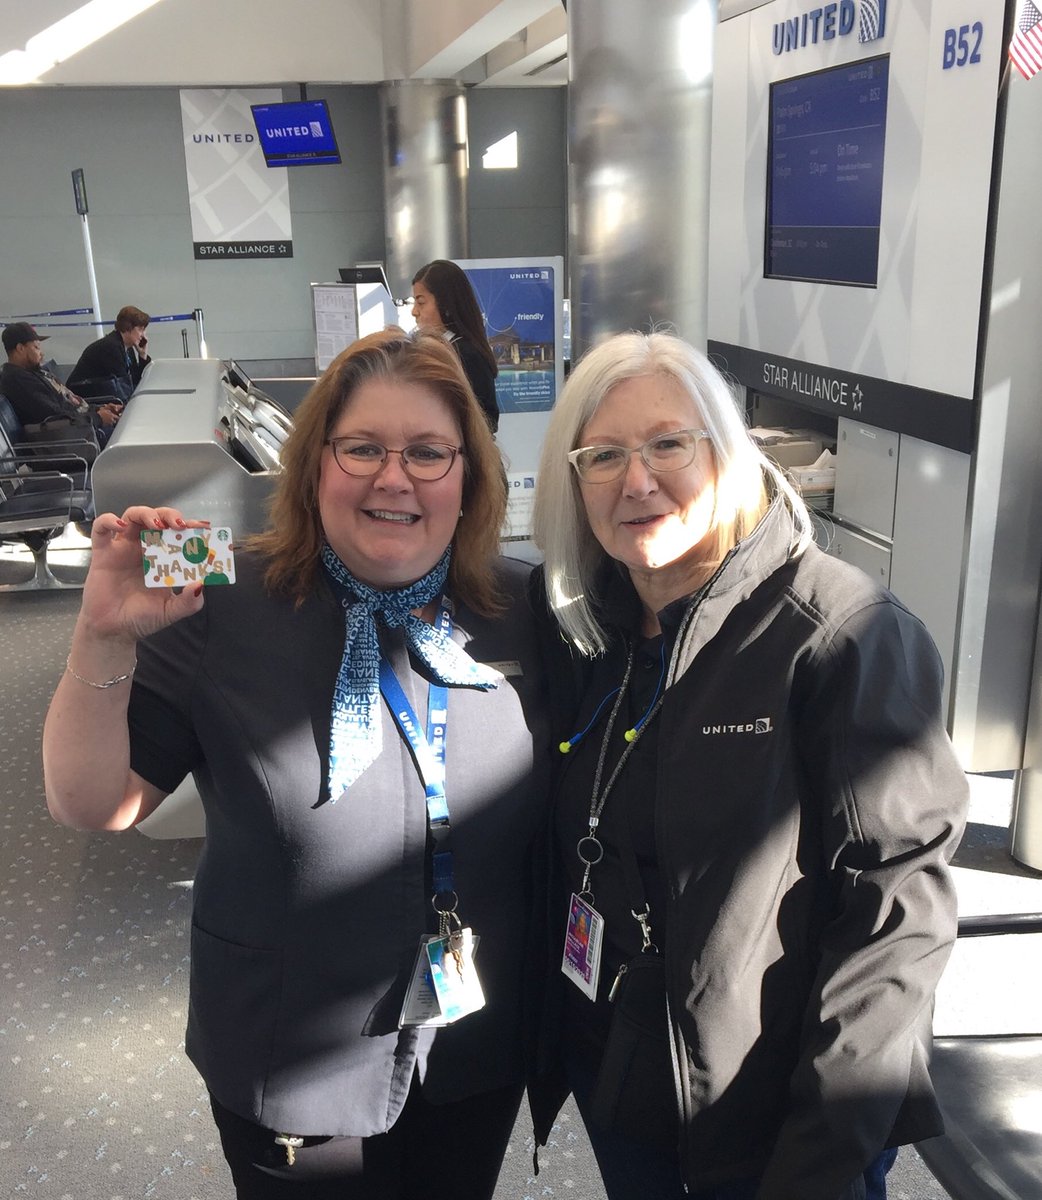 #UnitedConsistencyTeam setting mile high expectations for 🏔DEN quick turns.  Terry rose 🌹 to the challenge with aplomb!  ⁦@JMRoitman⁩ ⁦@kimb1rd⁩ ⁦@KevinSummerlin5⁩ ⁦@Steveatunited⁩ ⁦@BsquaredUA⁩